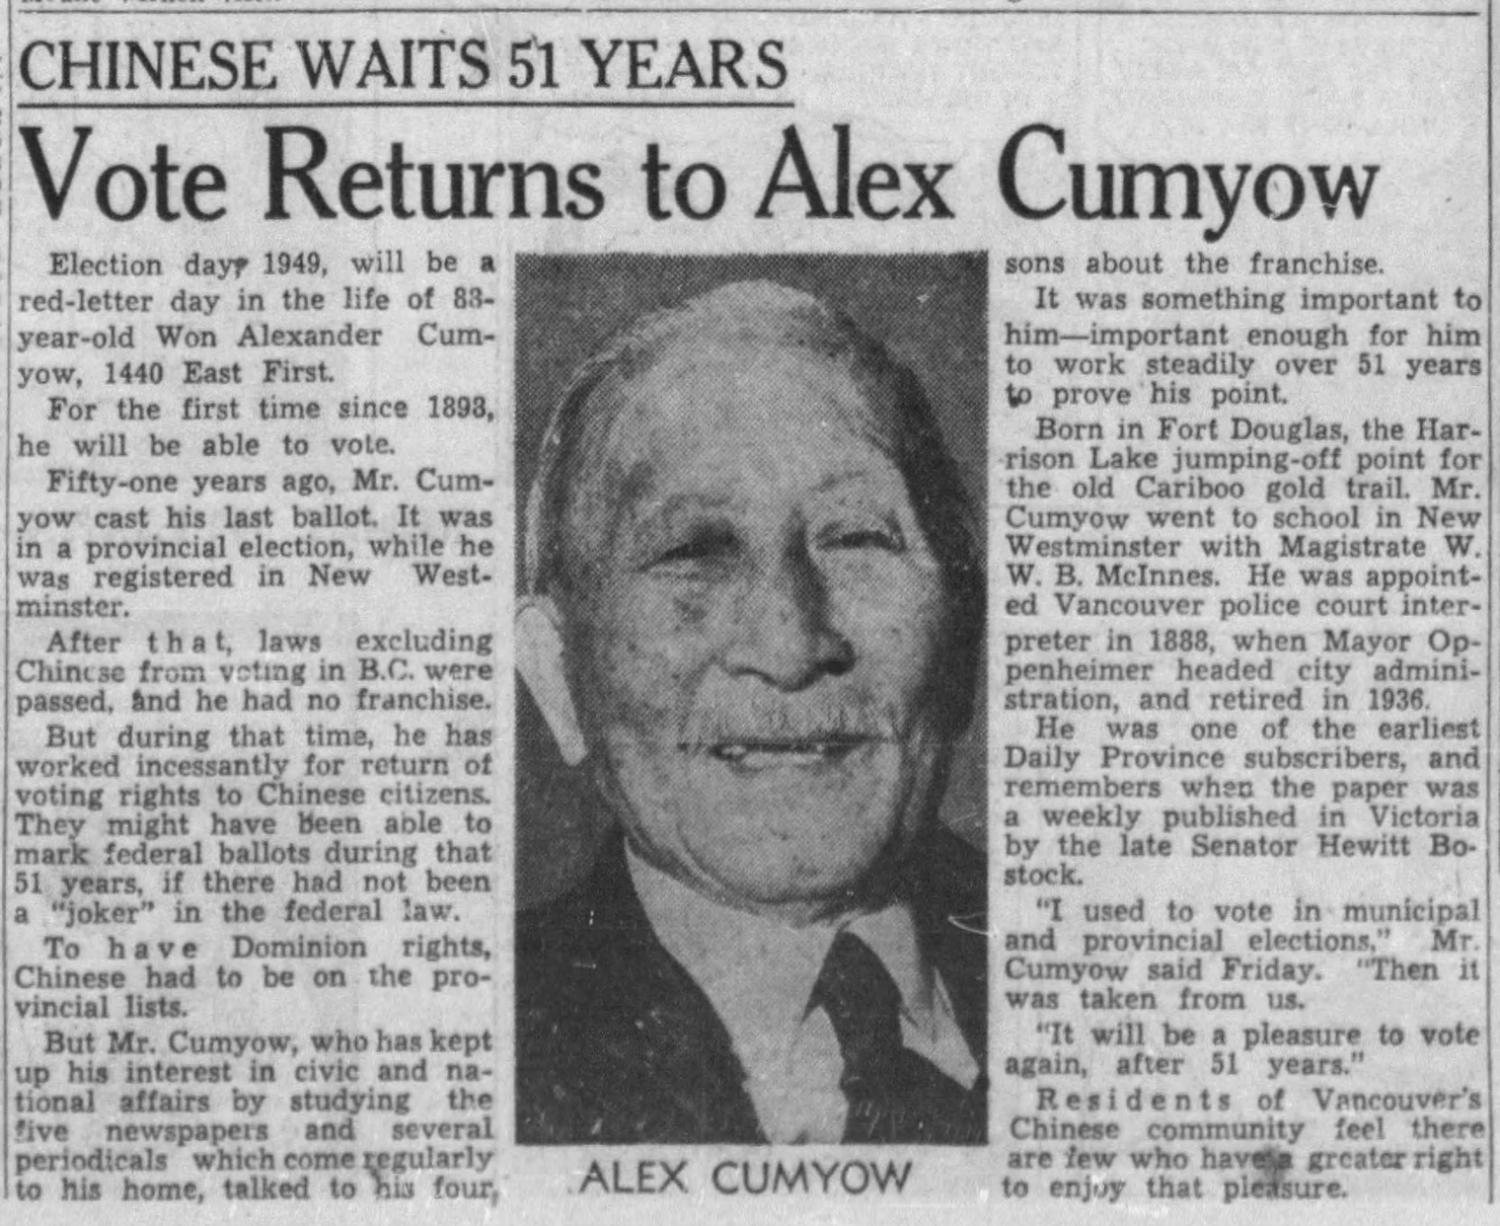 Article on Won Alexander Cumyow voting in the 1949 federal election.